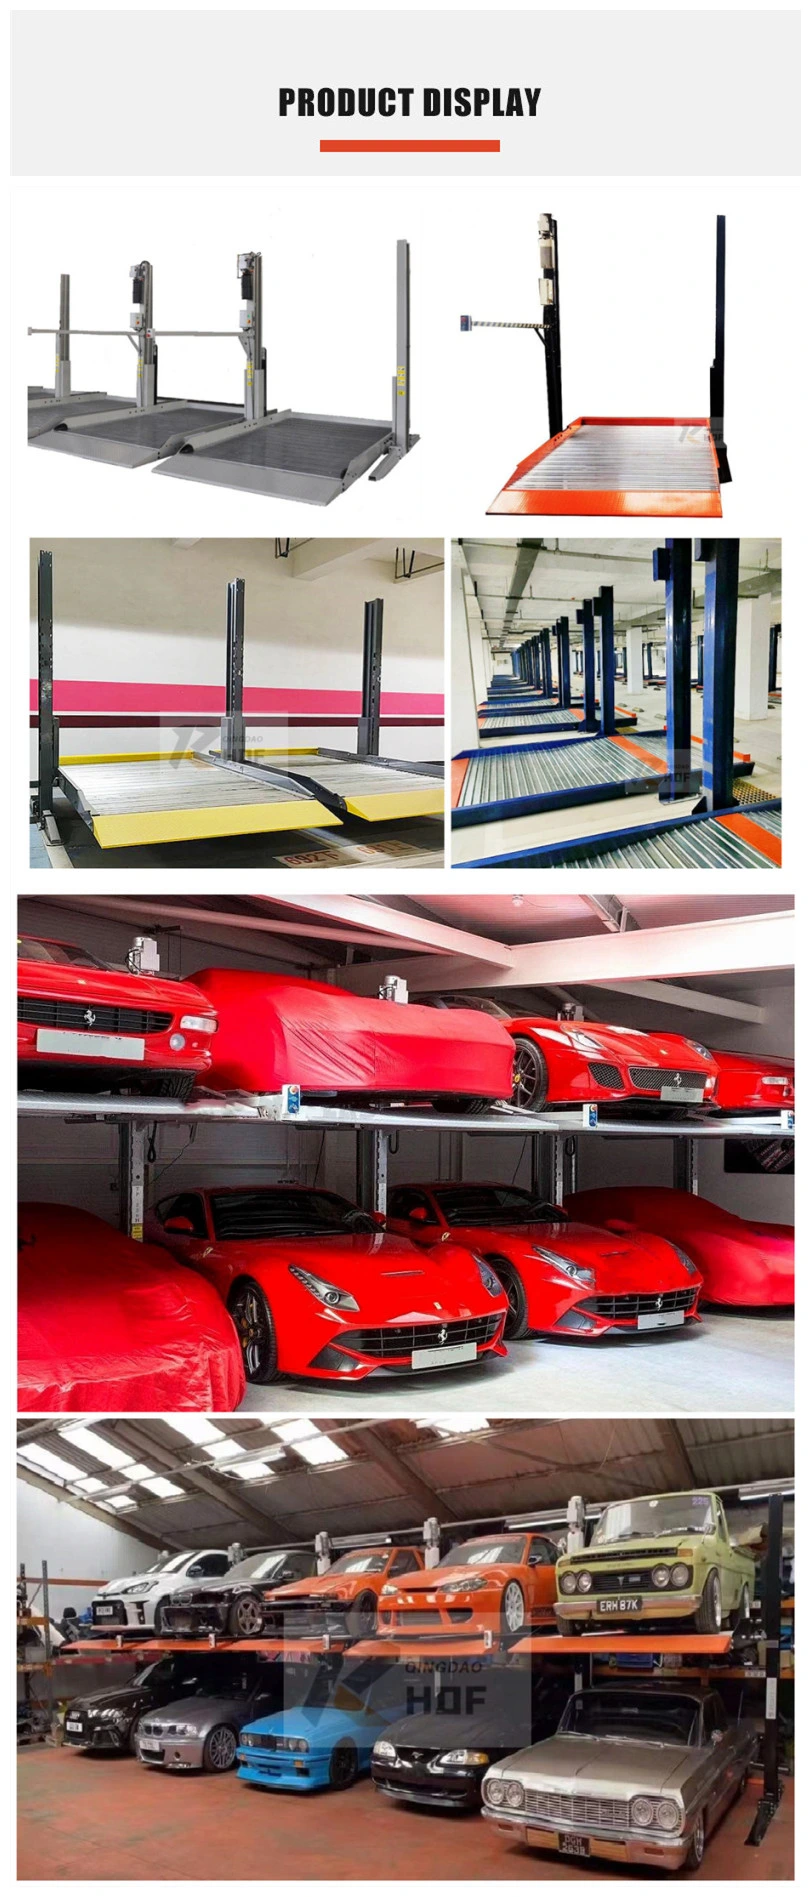 Hydraulic Cylinder Inground Pit Double Level Parking Lift Double Car Parking Equipment Four Post Vertical Hydraulic Car Parking Lift System